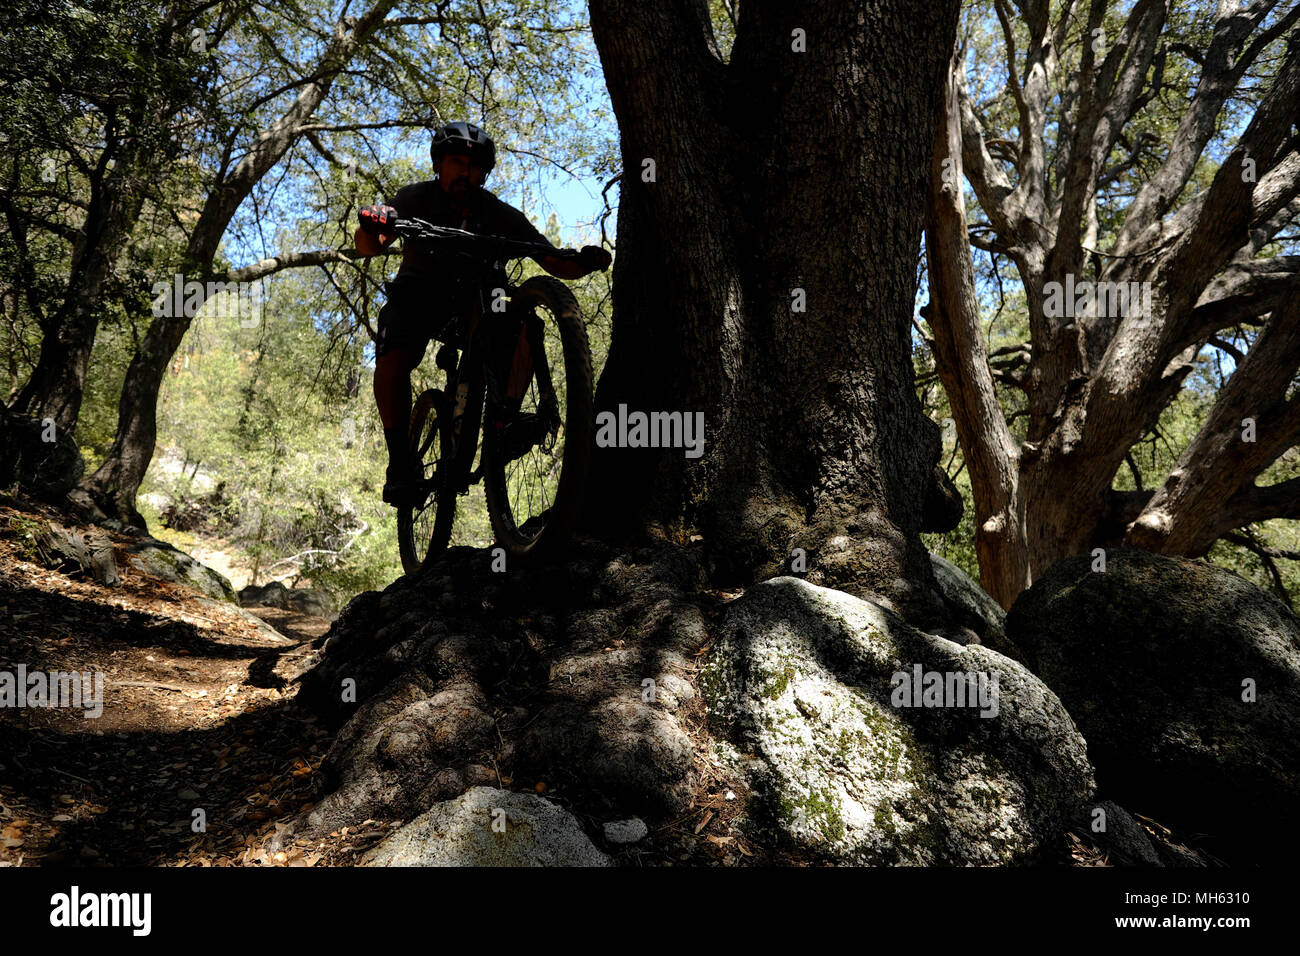 Idyllwild, California, USA. 29th Apr, 2018. Mountain biker rides steep trails past big rocks and oak tress at elevations above 6,500ft high above the desert floor near Idyllwild in the San Jacinto Mountains. Rising abruptly from the desert floor, the Santa Rosa and San Jacinto Mountains National Monument reaches an elevation of 10,834 feet, the northernmost of the Peninsular Ranges system. Many flora and fauna species within the national monument are state and federal listed threatened or endangered species, including the Peninsular Bighorn Sheep (Ovis canadensis cremnobates), a subspecies en Stock Photo